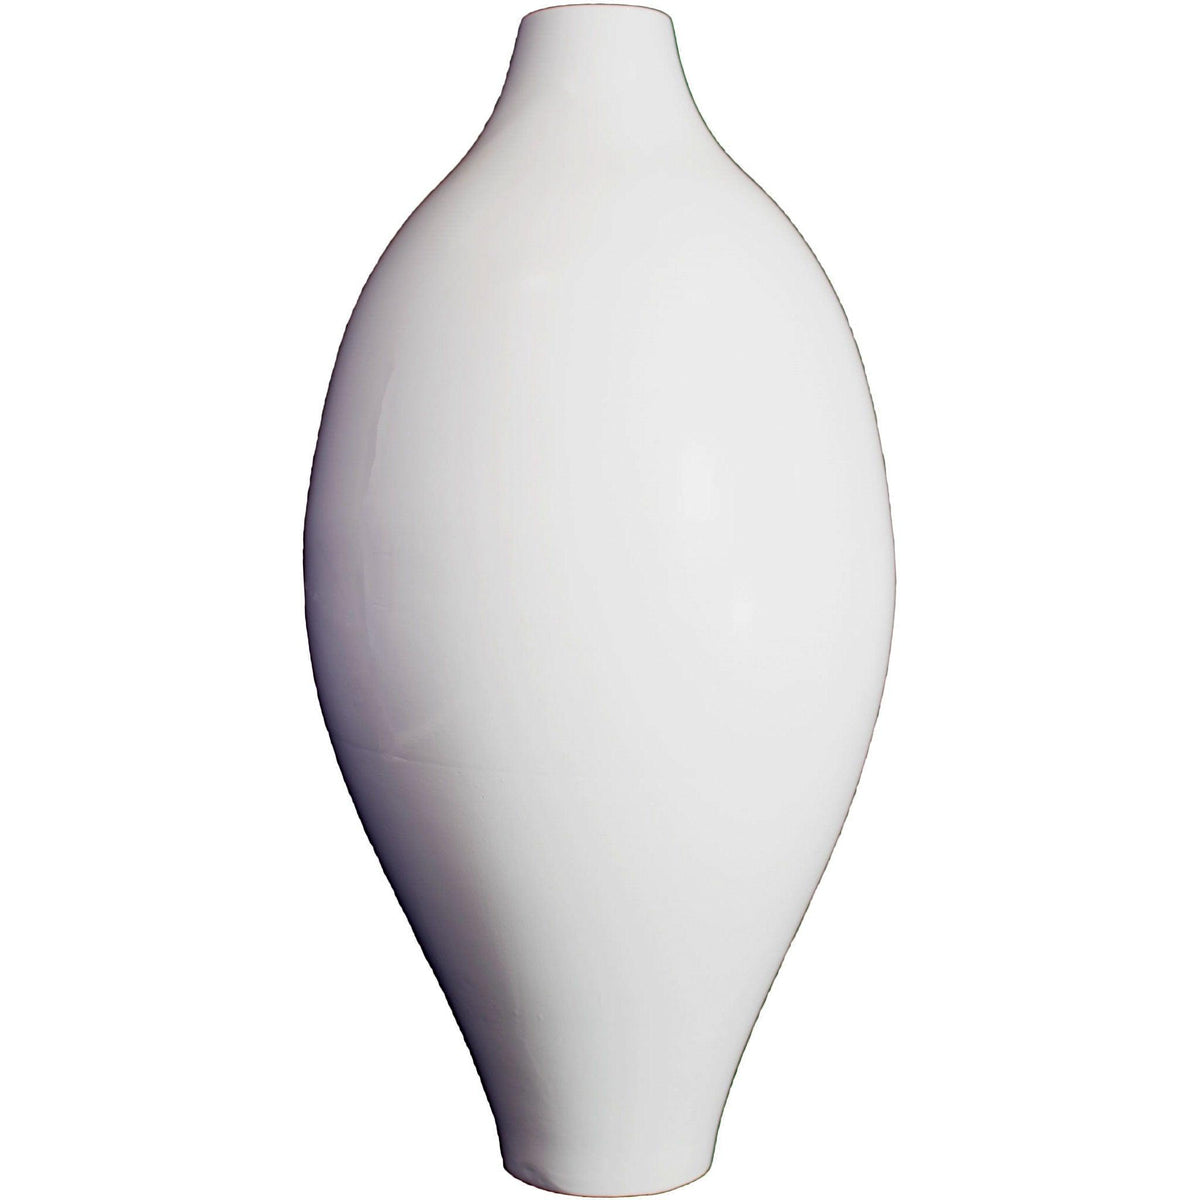 Lee Display's brand new 22in Amphora Ceramic Vase comes in a high gloss white finish on sale at leedisplay.com